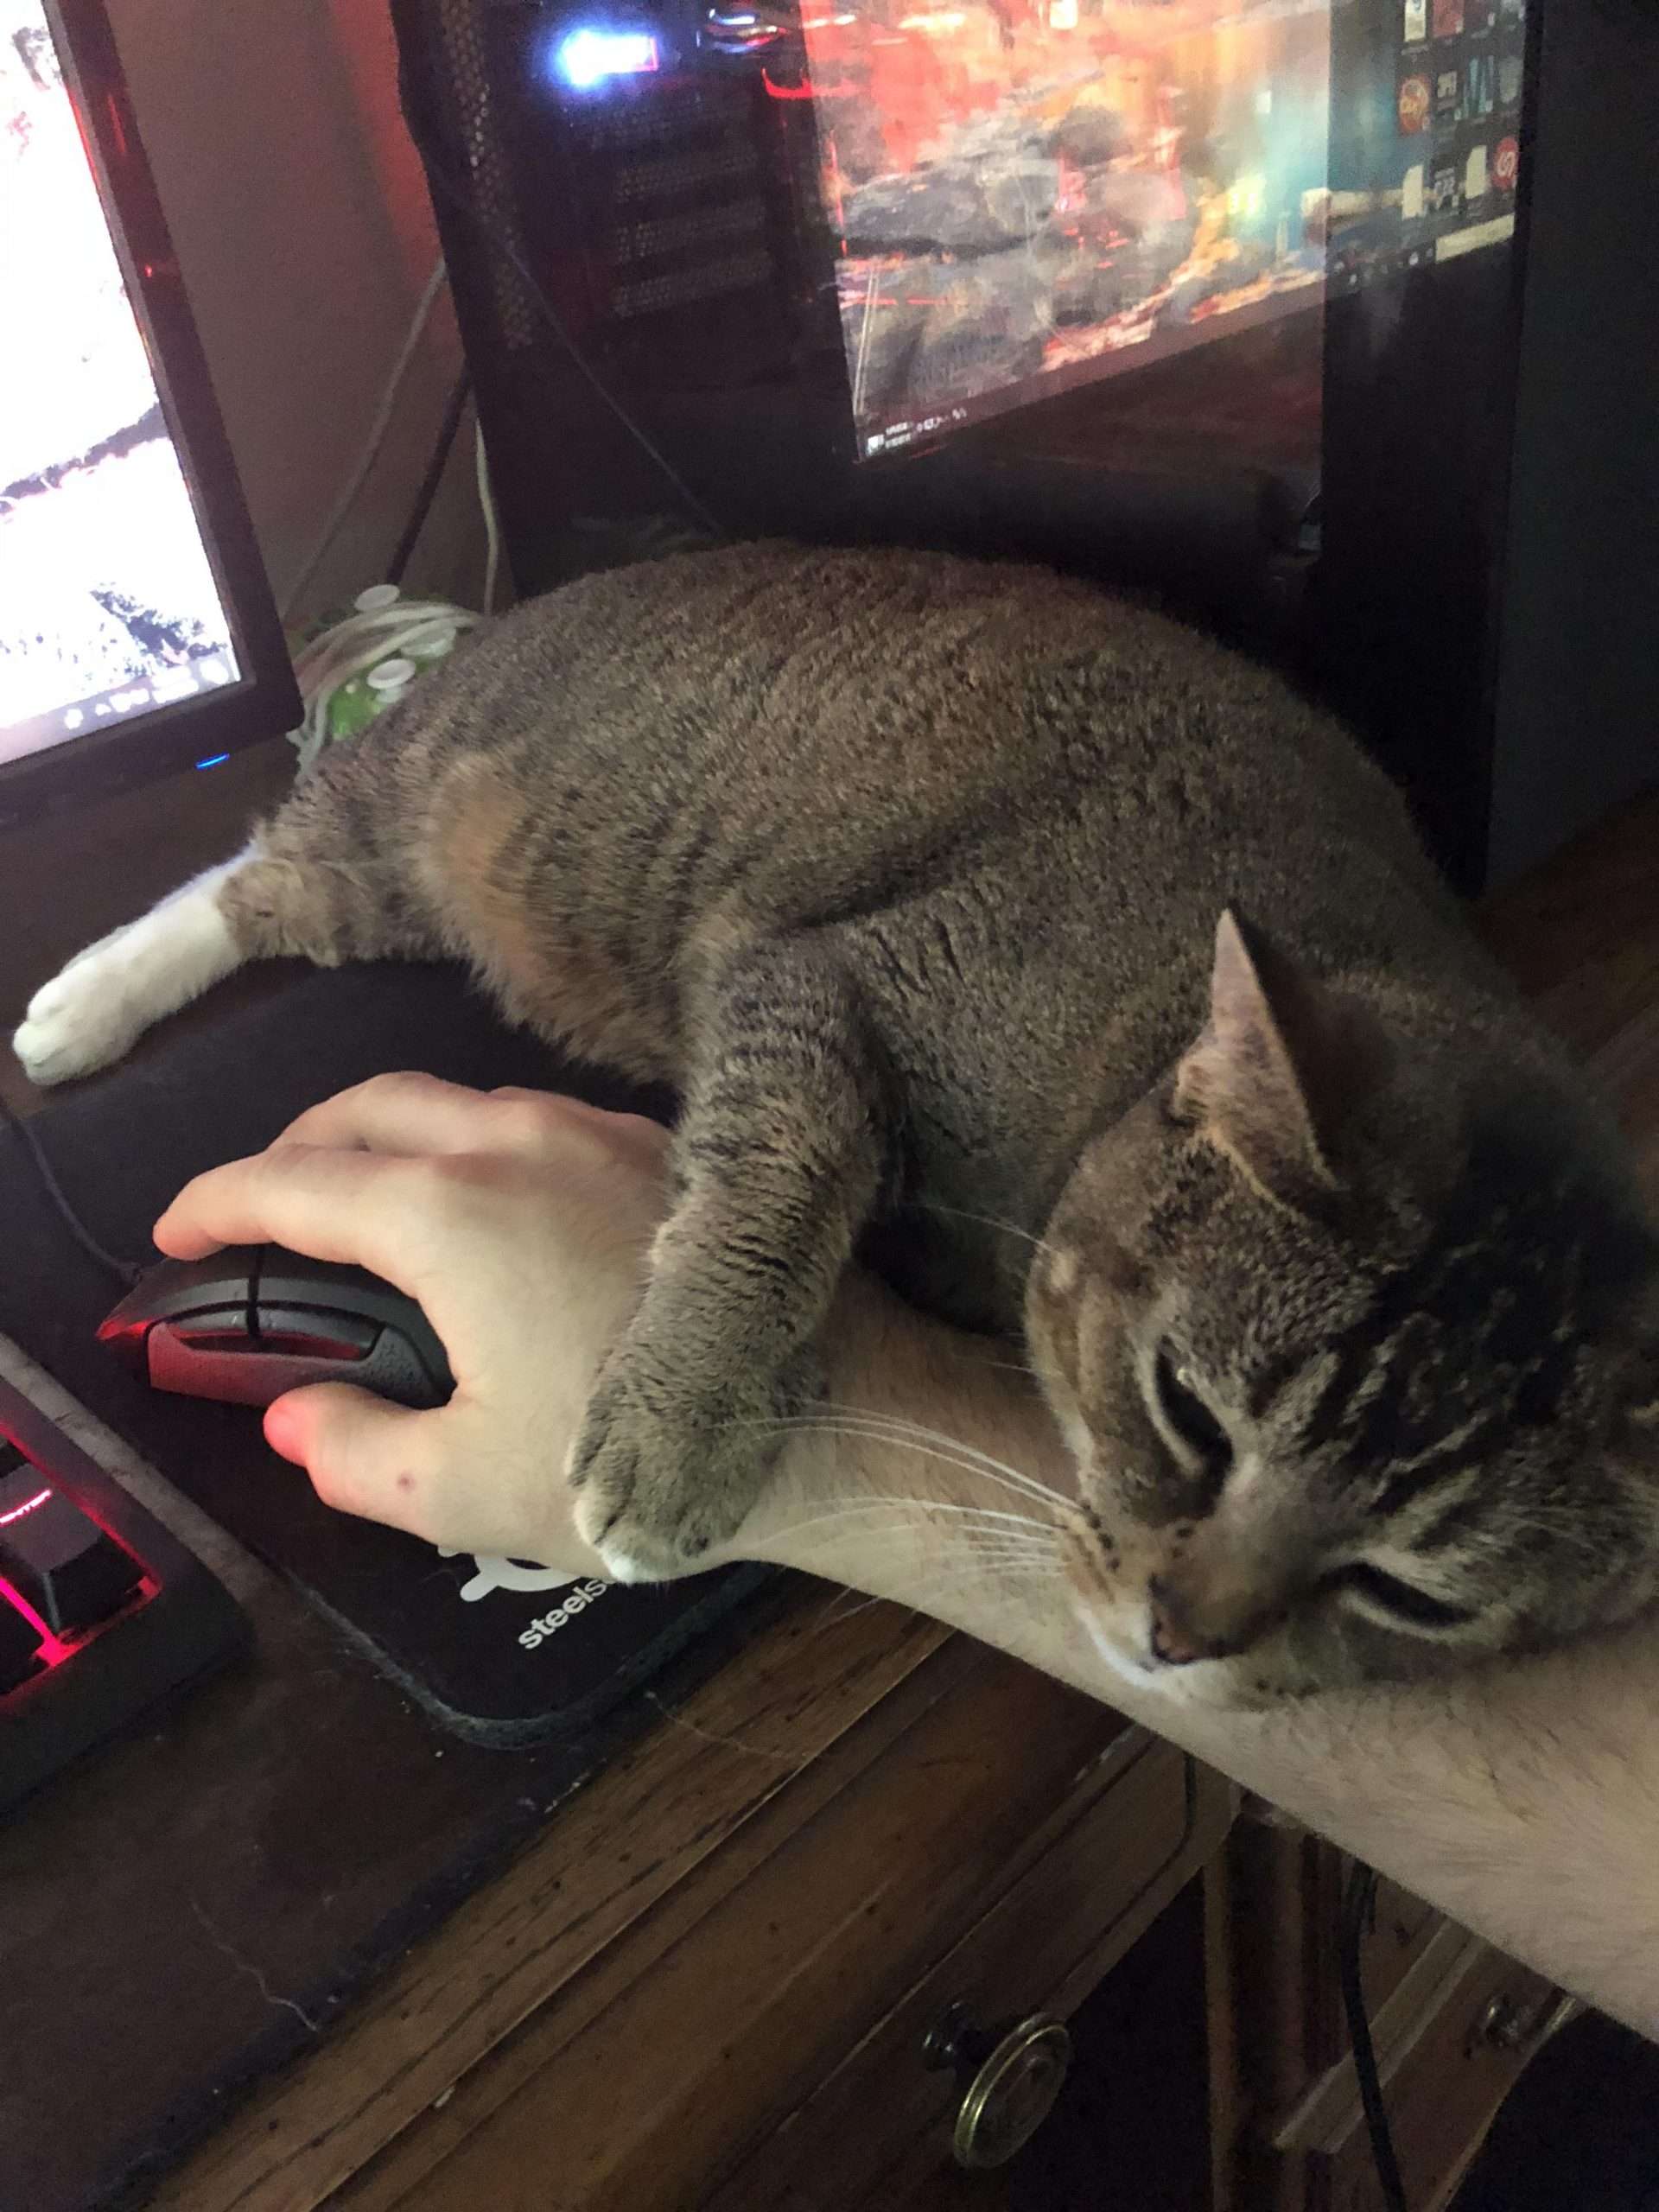 When your cat tells you its time for a break : aww